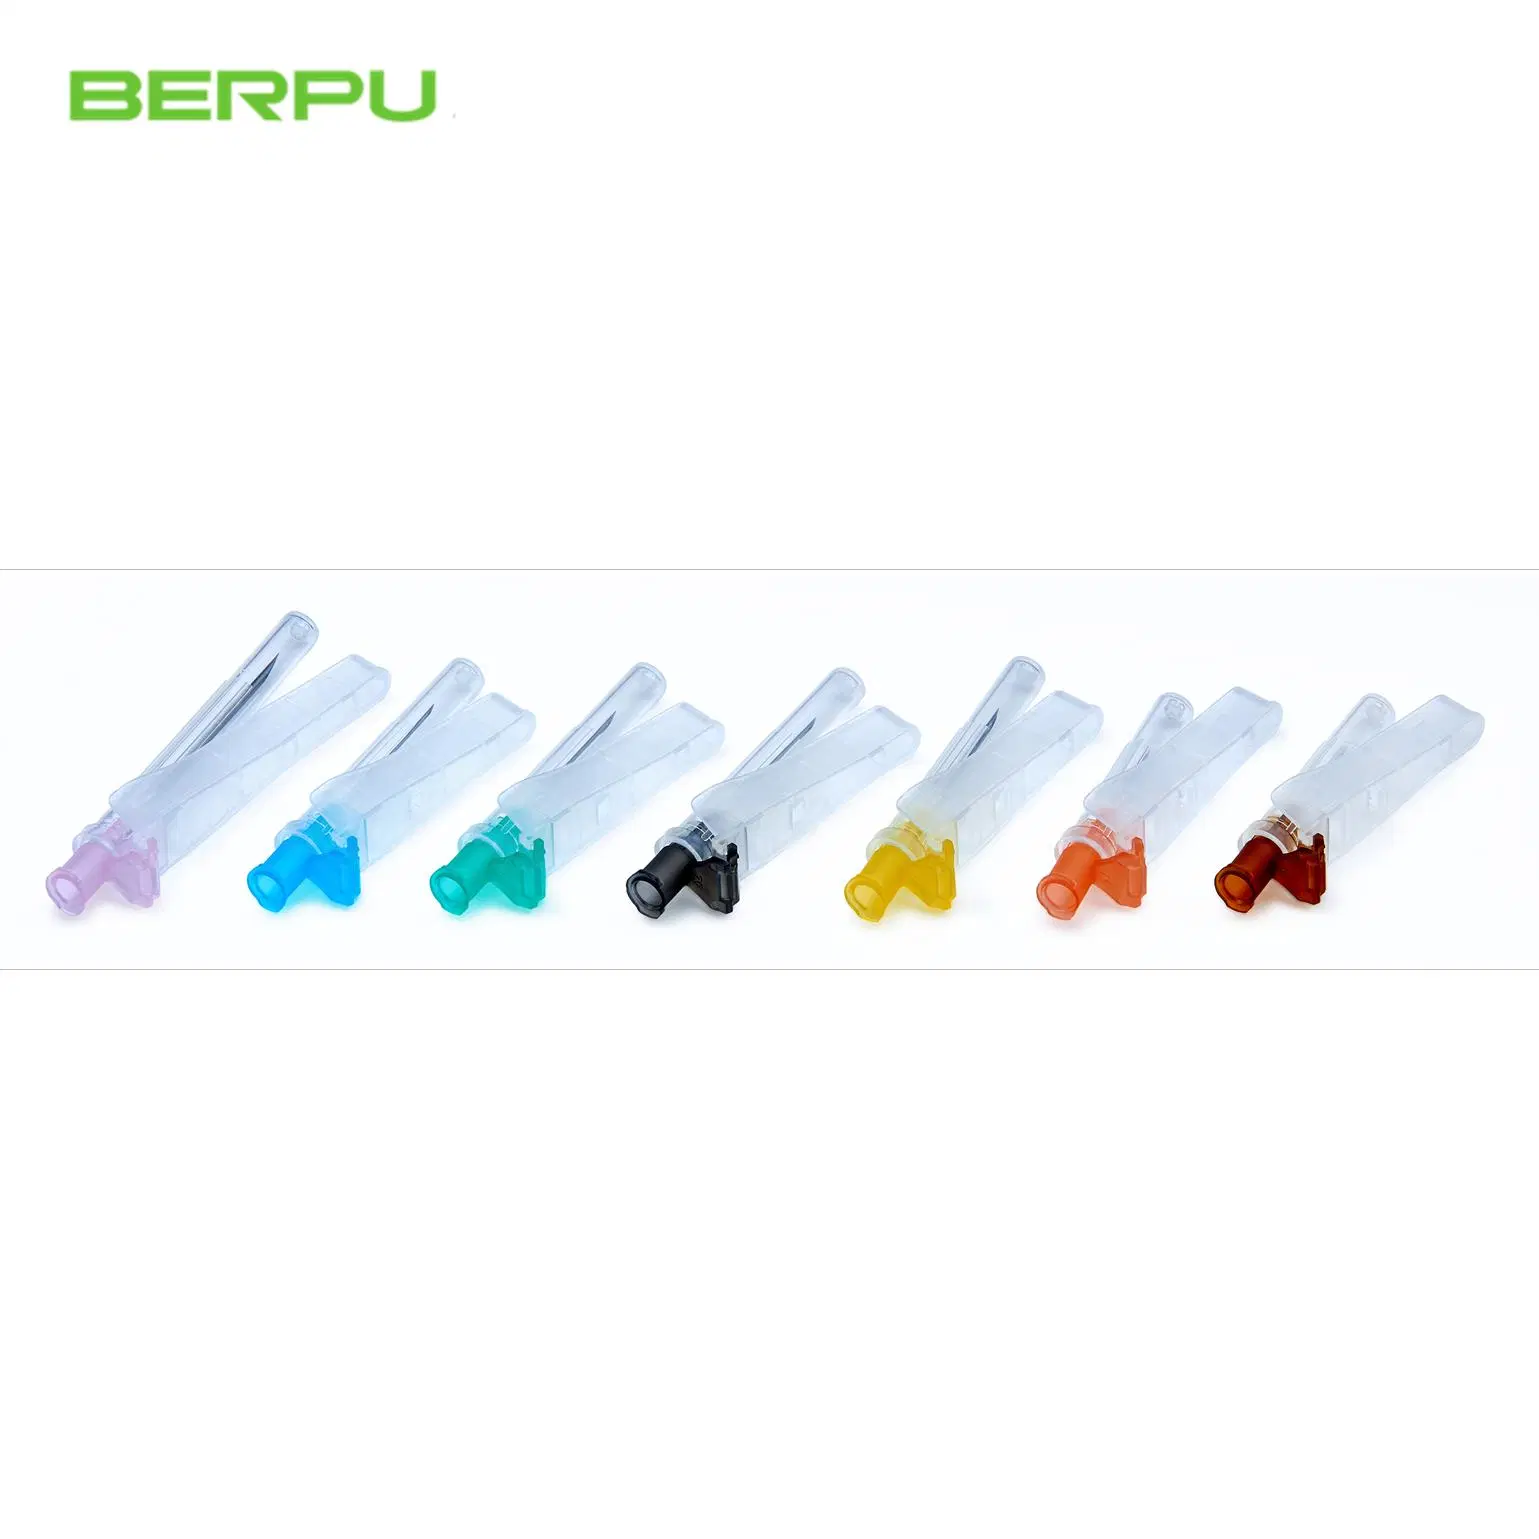 Berpu Excellent Disposable Injection Hypodermic Safety Needles for Singe Use, CE FDA Mark 18g 19g 20g 21g 22g 23G 24G 25g